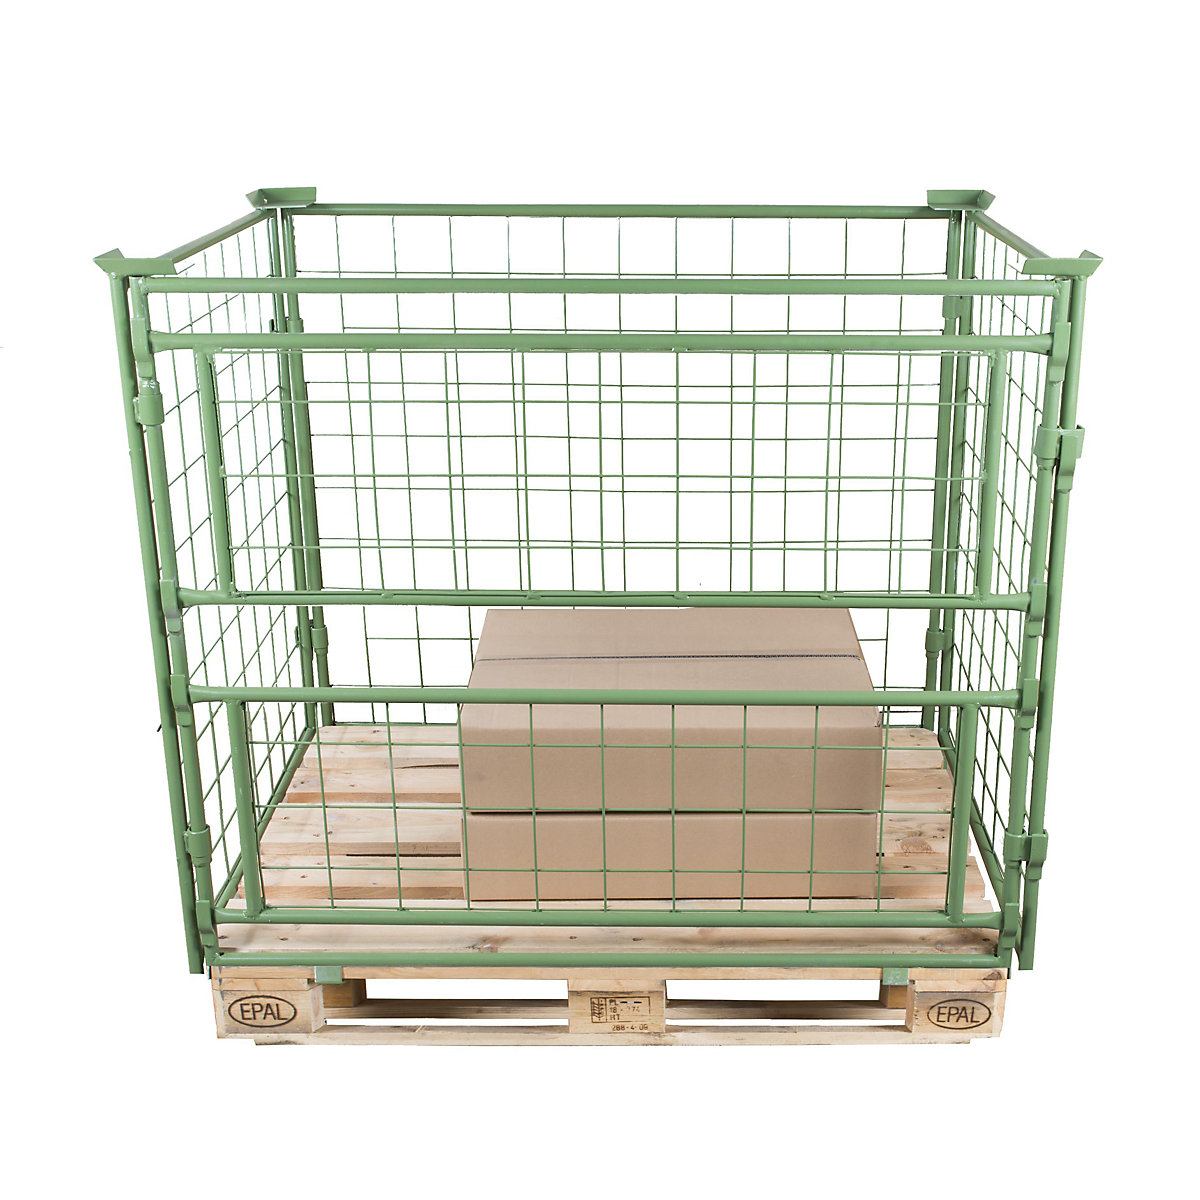 Pallet frame, effective height 1200 mm, for stacking, WxL 800 x 1200 mm, 1 long side with 2 parts, removable-1